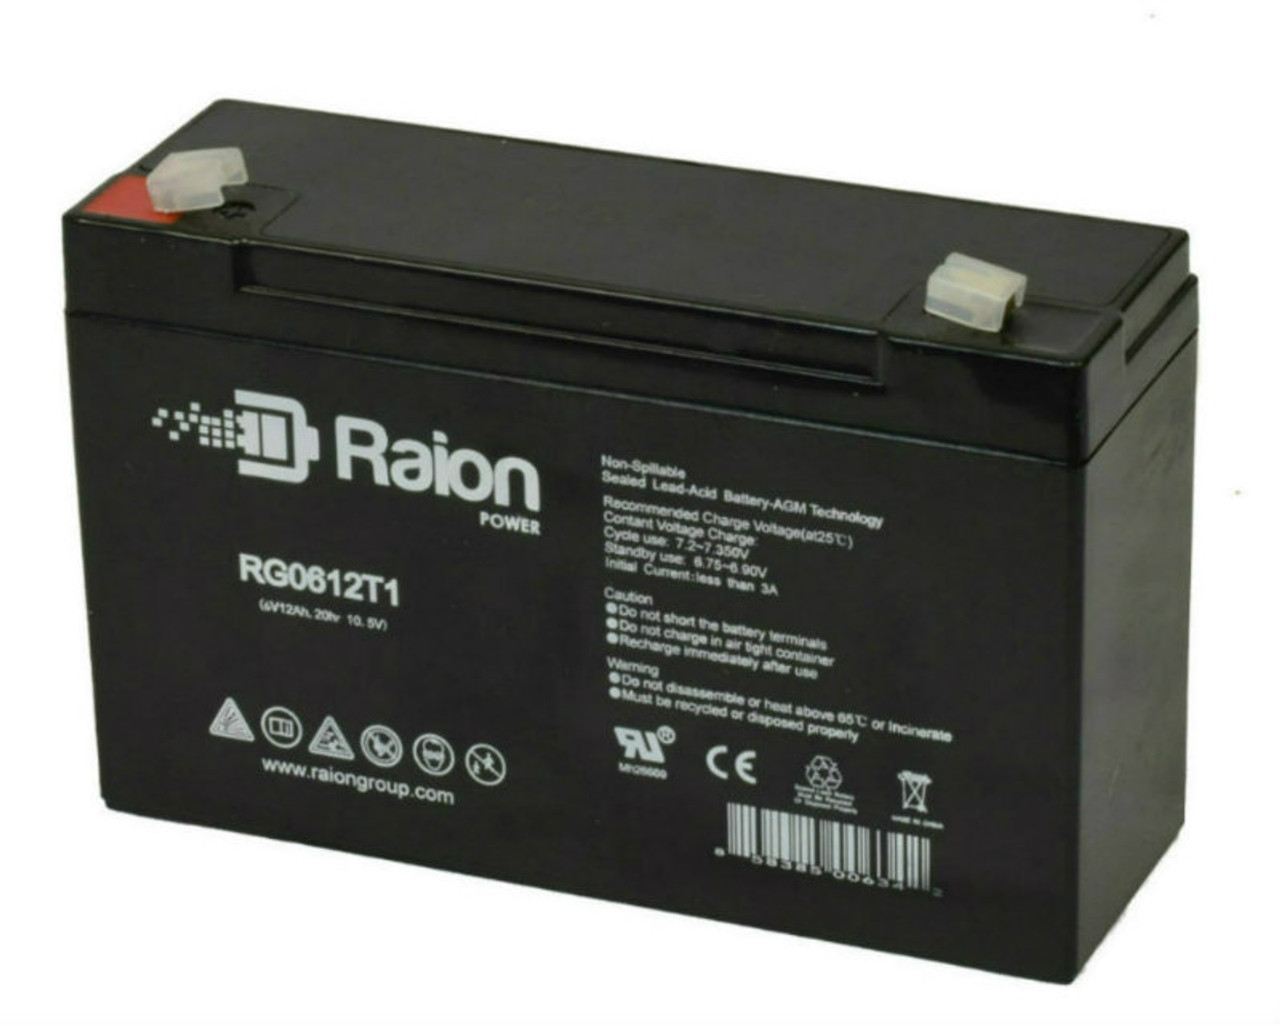 Raion Power RG06120T1 Replacement Battery for LONG WP10-6